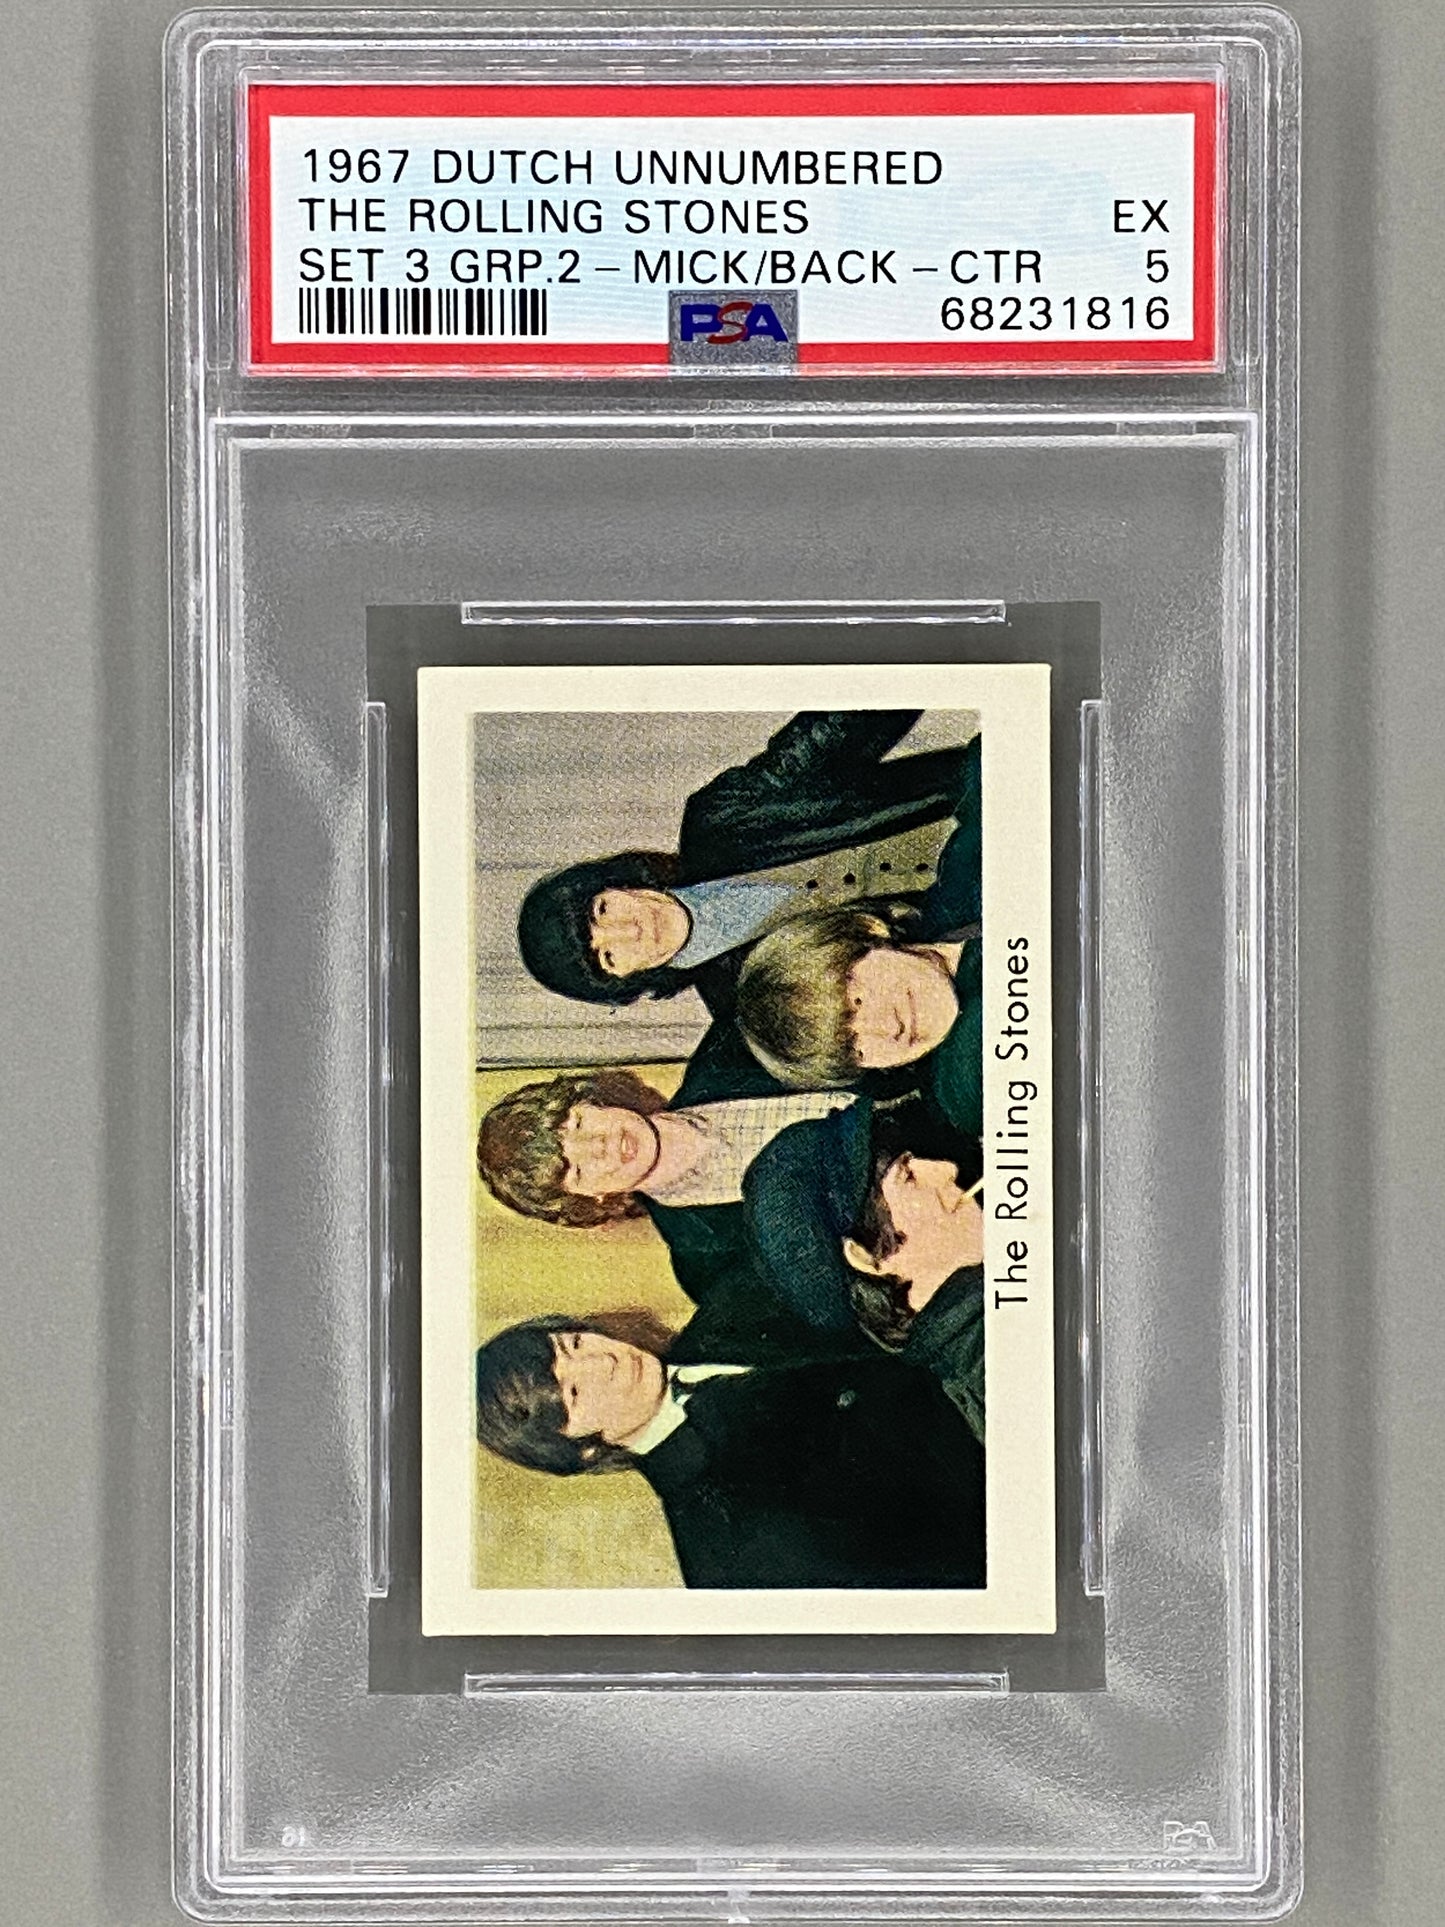 1967 Dutch Unnumbered The Rolling Stones Set 3 Group 2 Mick/Back-Ctr PSA 5 (Music)